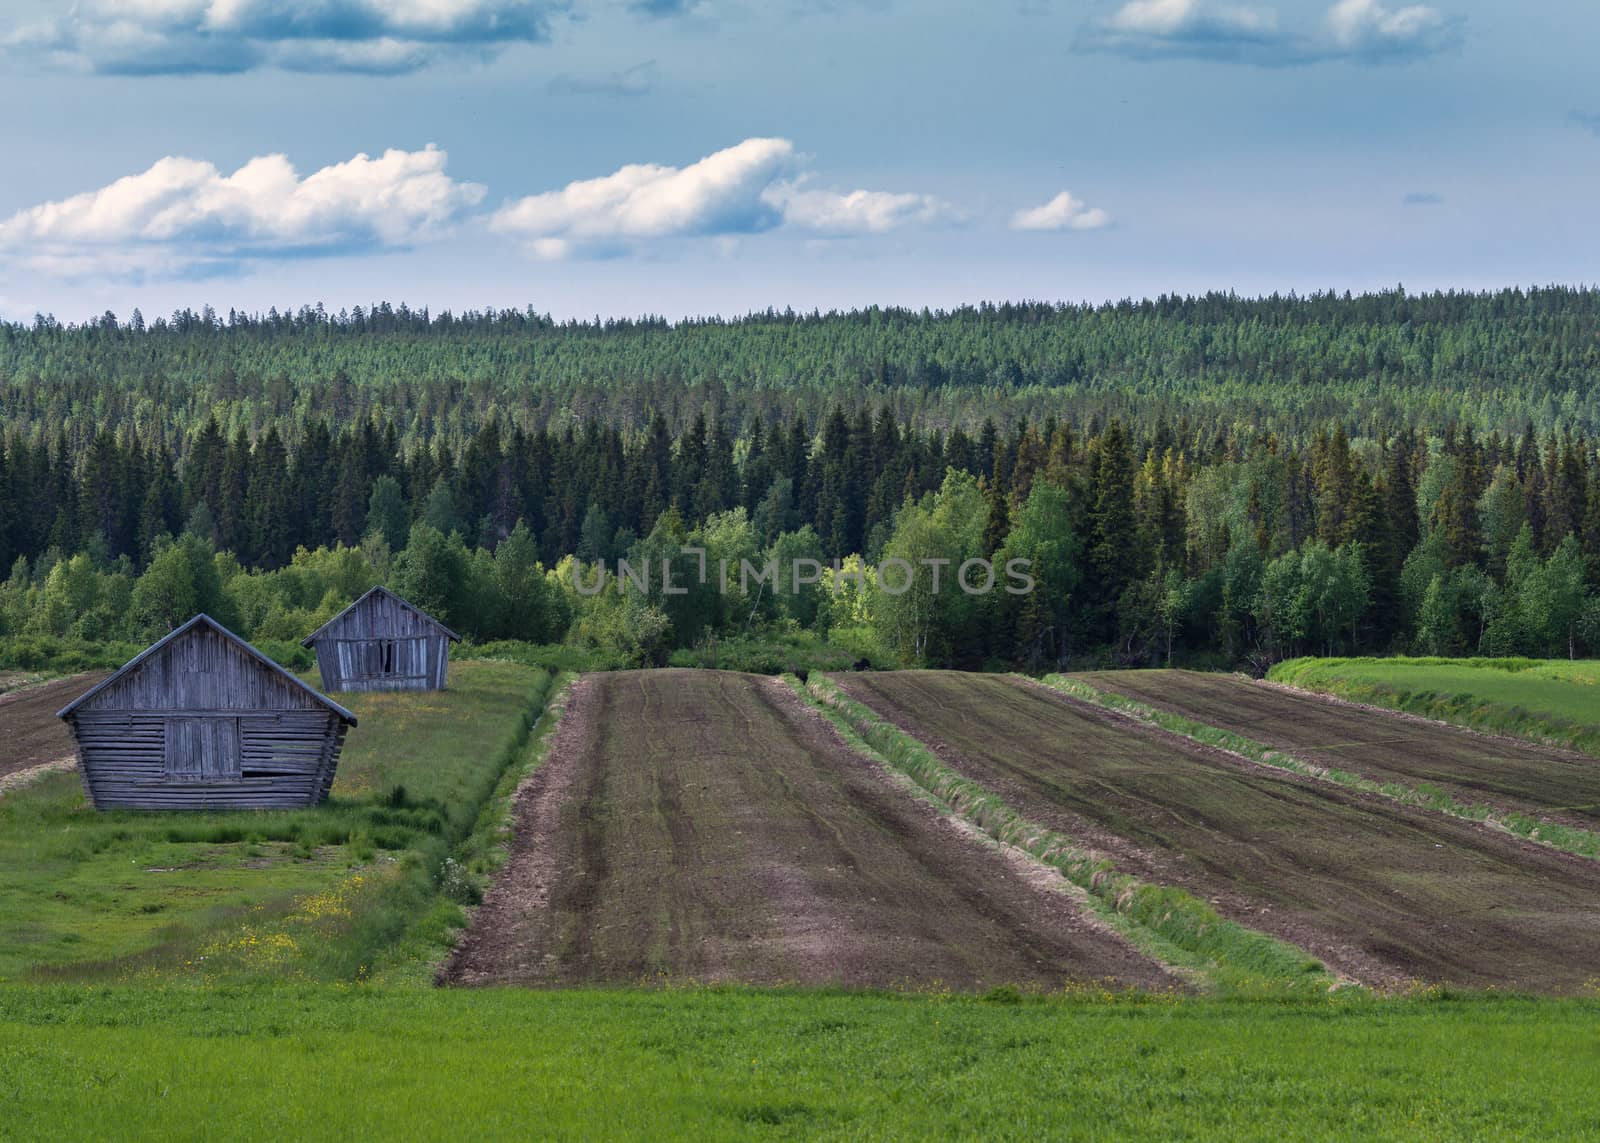 Lines, barns and green under blue cloudy skies in Lapland. by Claudine